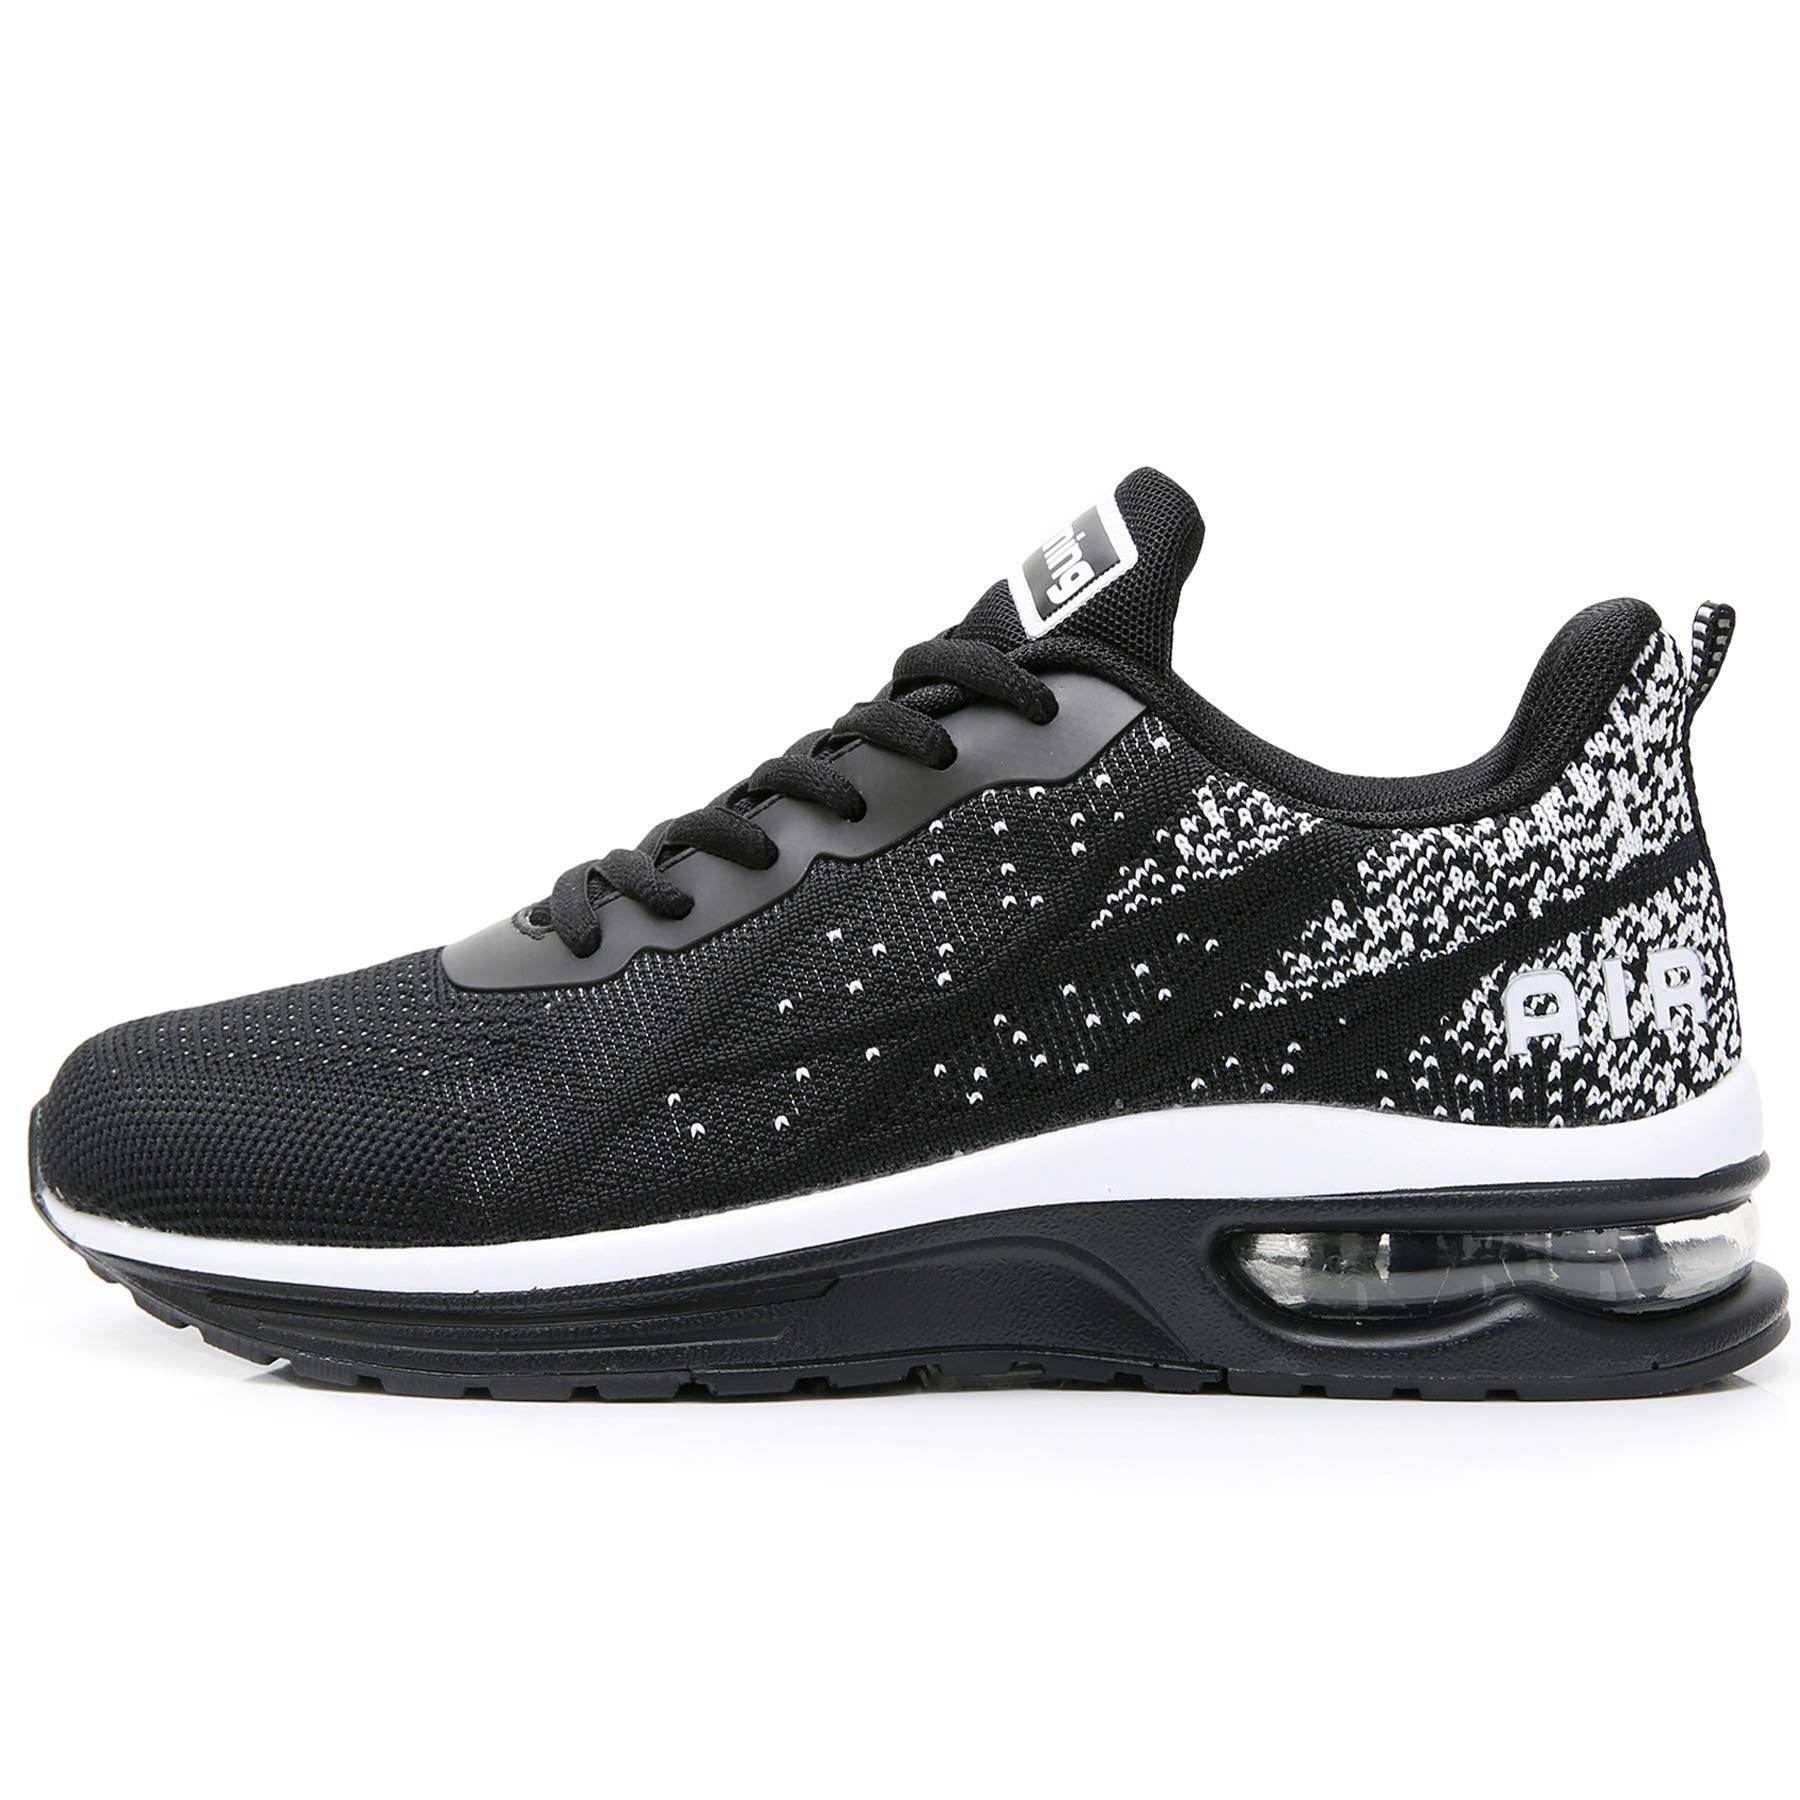 Unisex Shock-Absorbing Breathable Knitted Sneakers